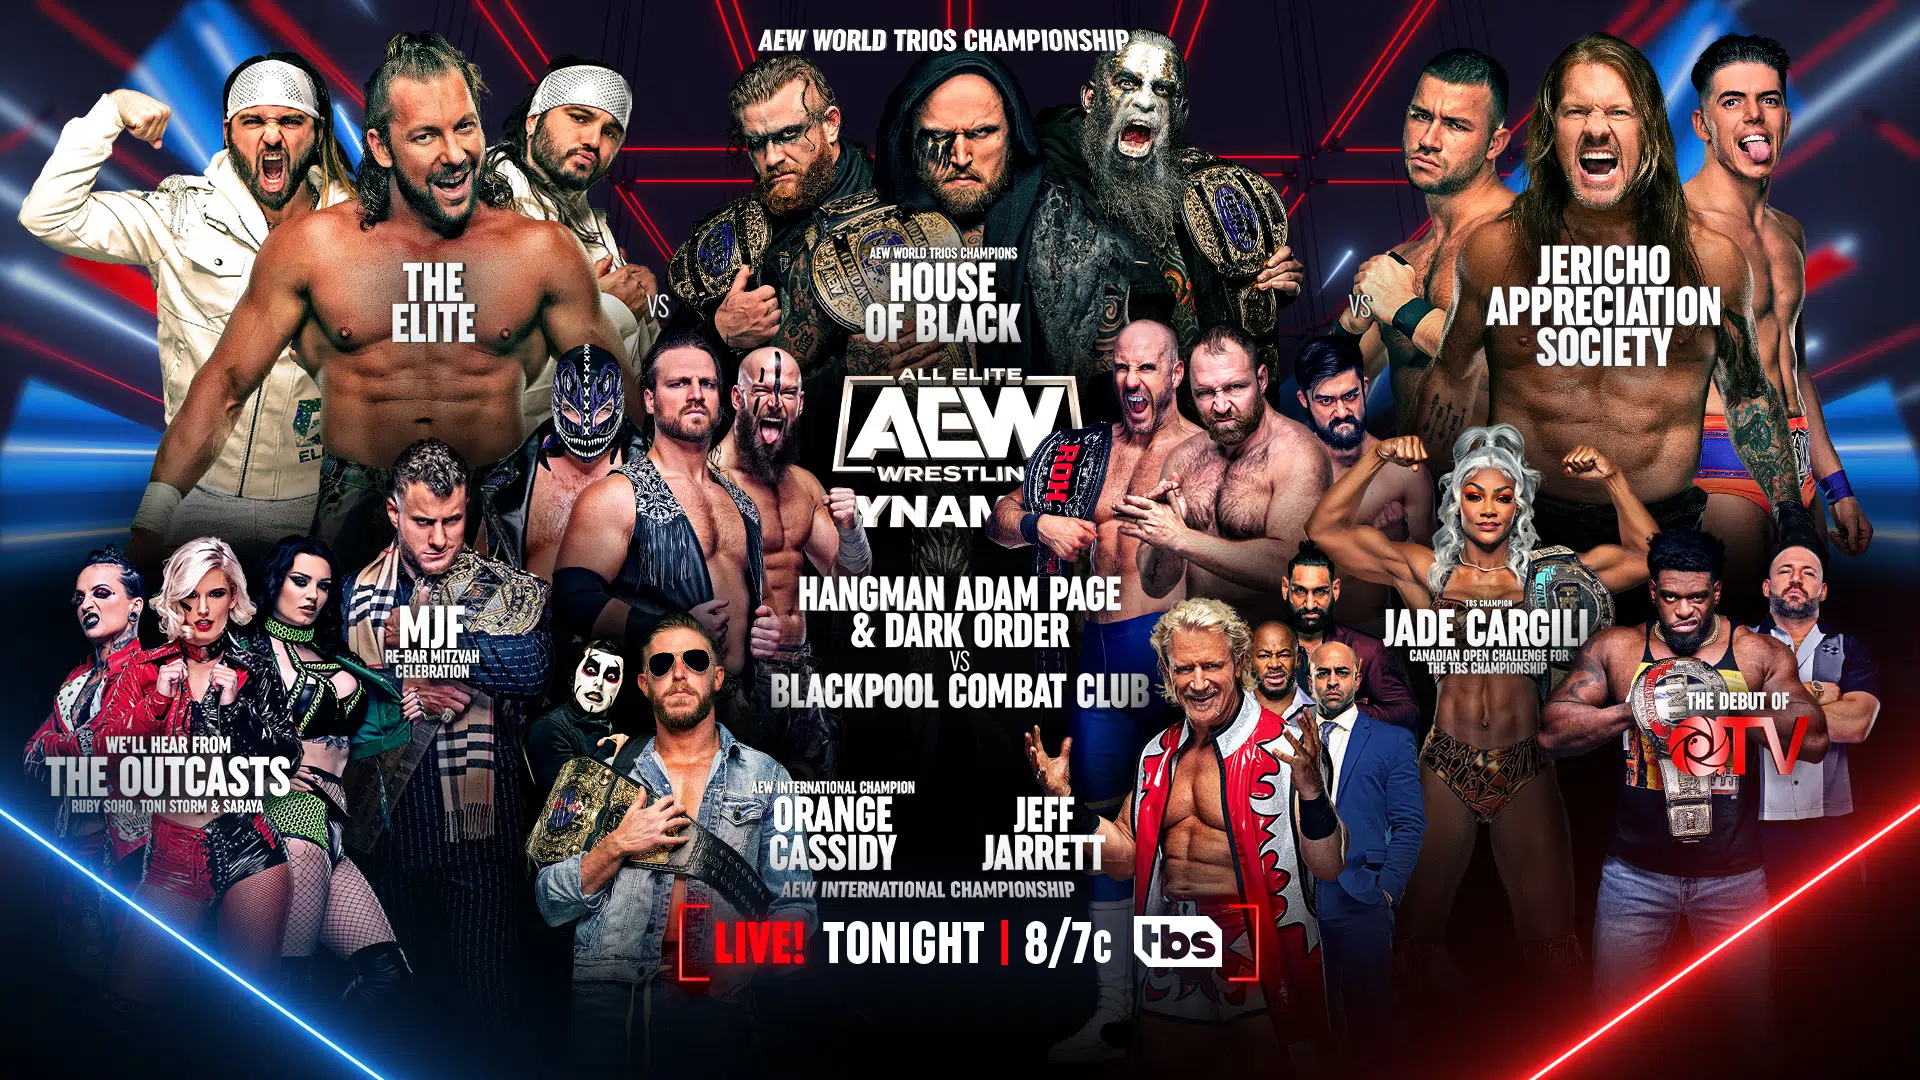 What You Need to Know Before Going To AEW Tonight